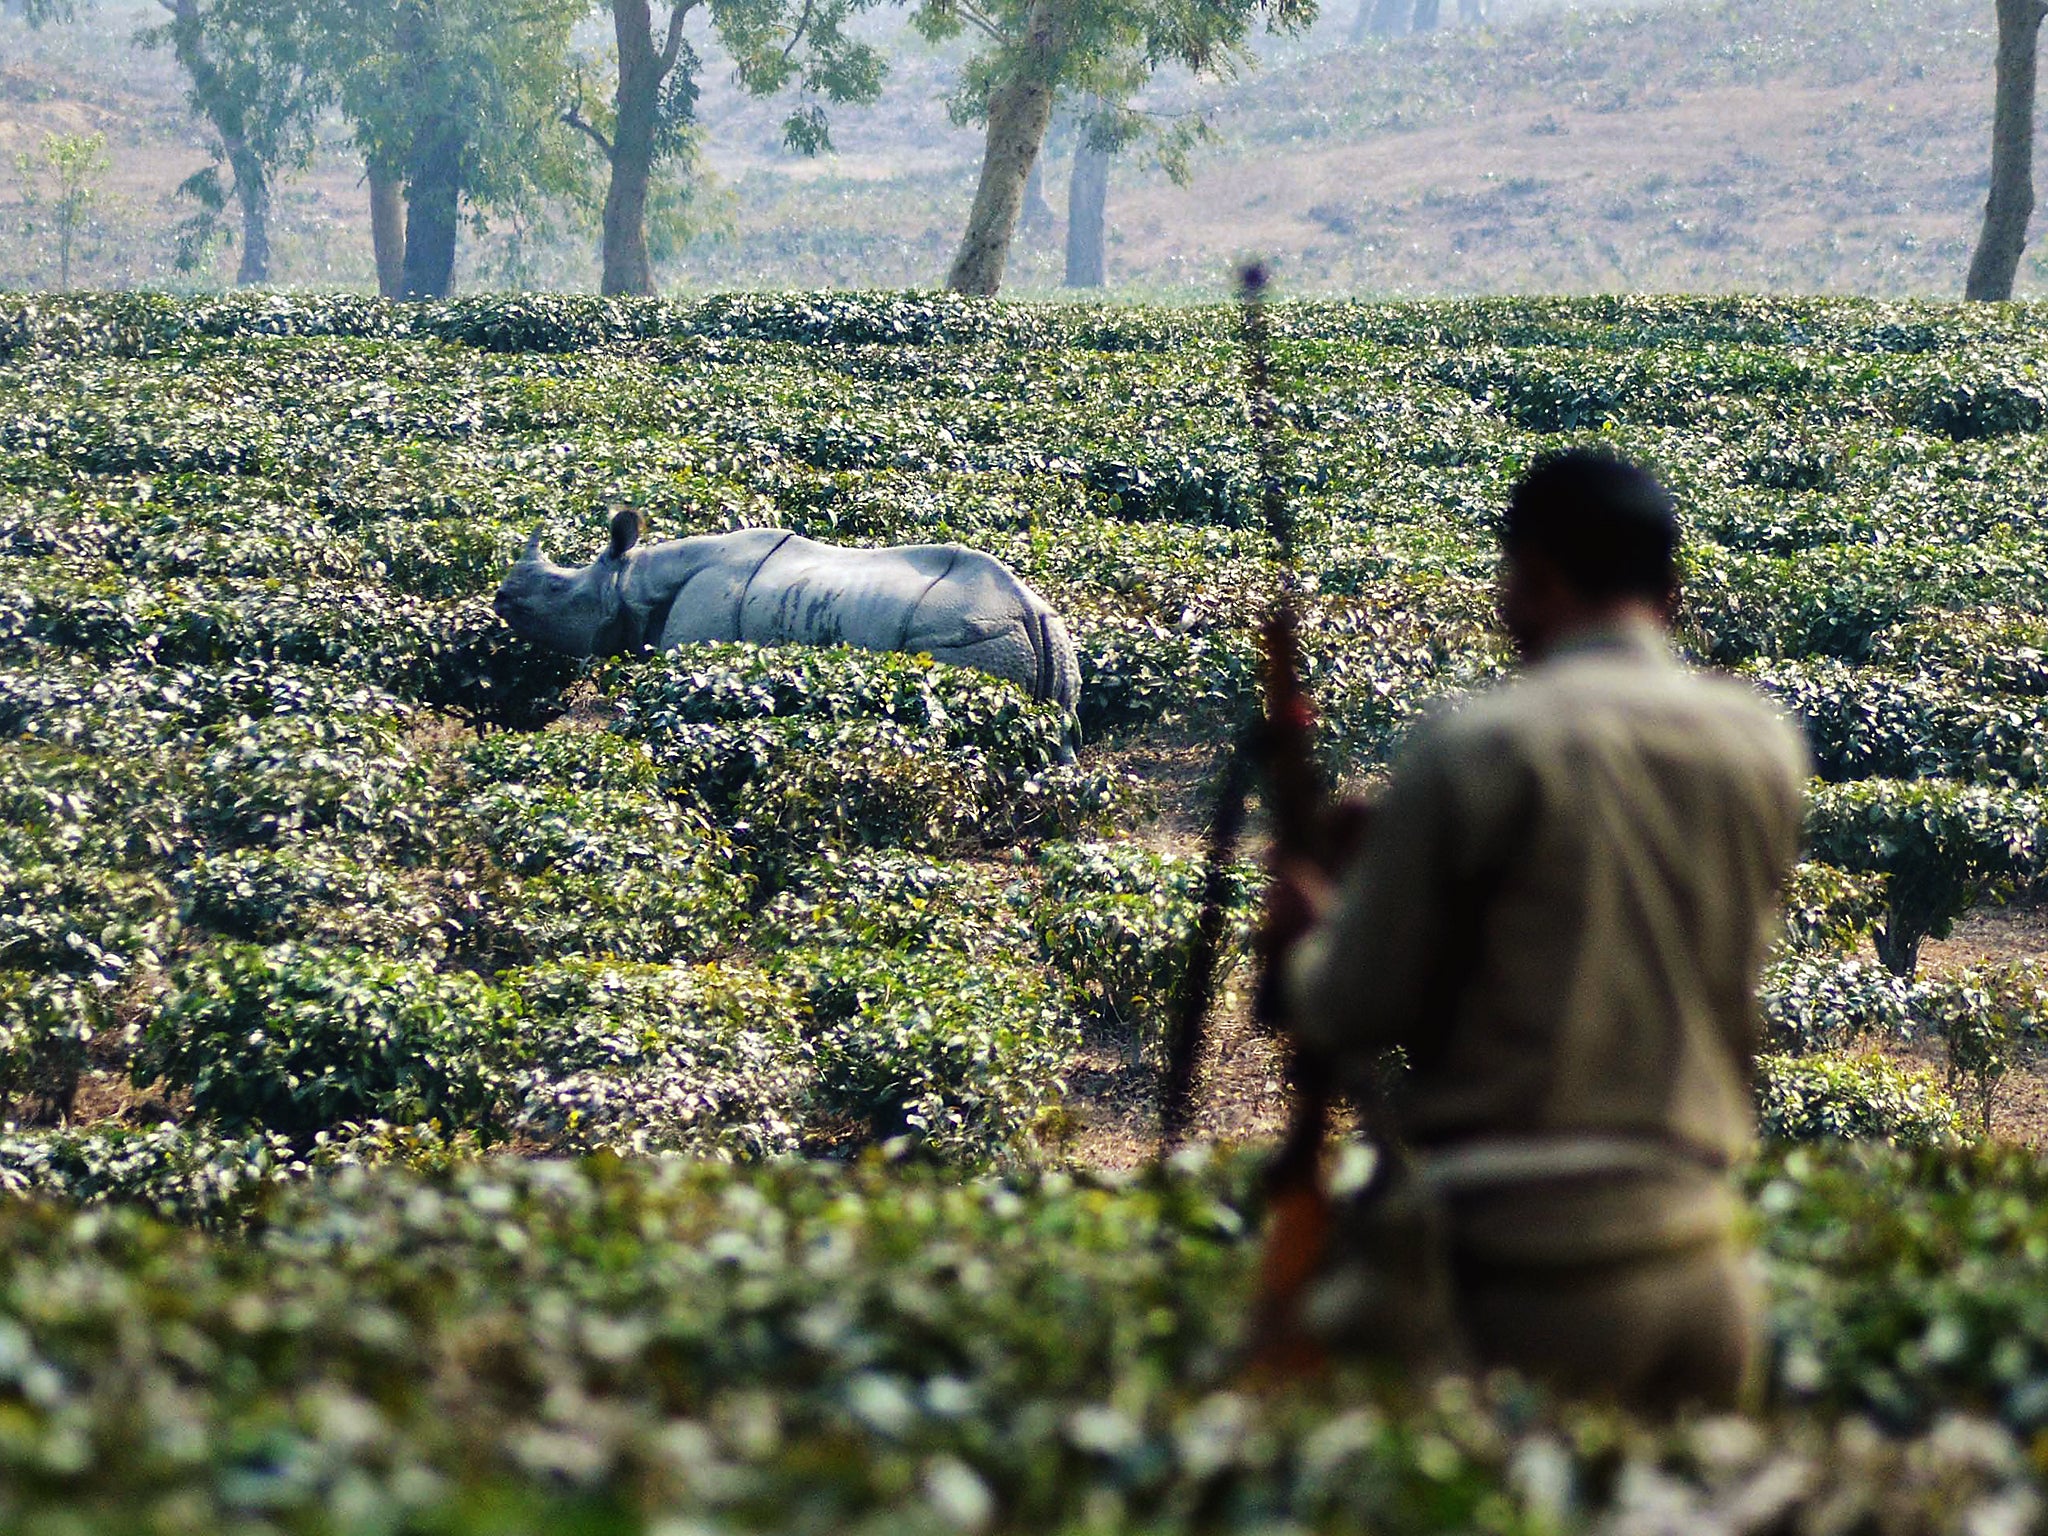 &#13;
An Indian forest guard watches over a one-horned rhinoceros near the Kaziranga National Park in the Indian state of Assam (Getty)&#13;